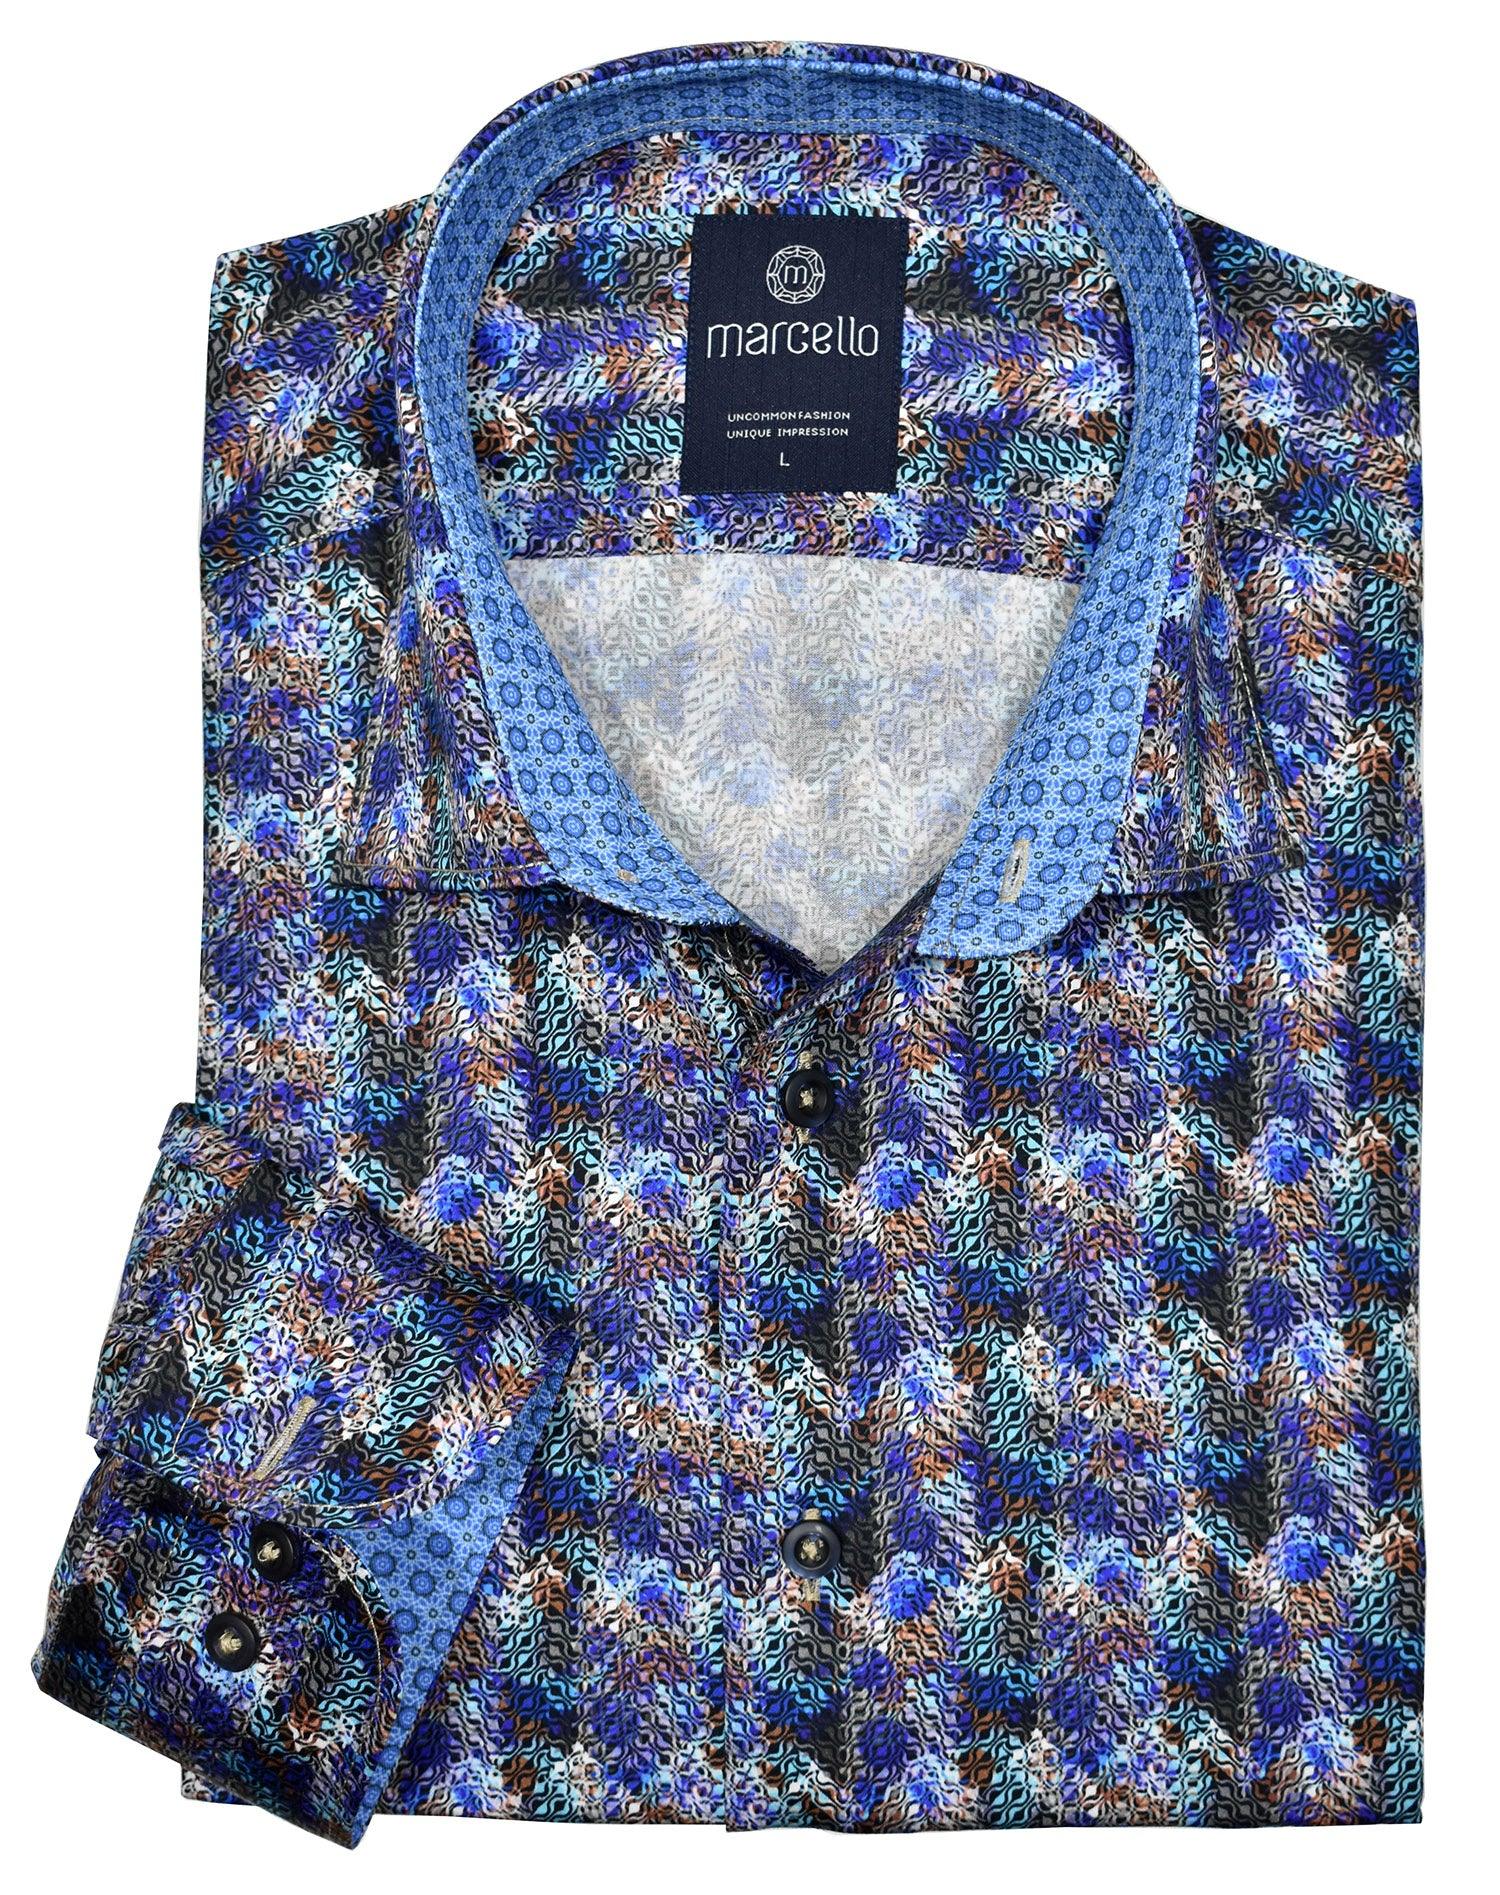 A cool micro geometric pattern that almost looks like a shaded snake skin pattern.  Soft cotton fabric. Custom matched trim fabric and buttons. Medium collar. Two button cuff system for turning up the cuffs. Classic shaped fit. By Marcello Sport